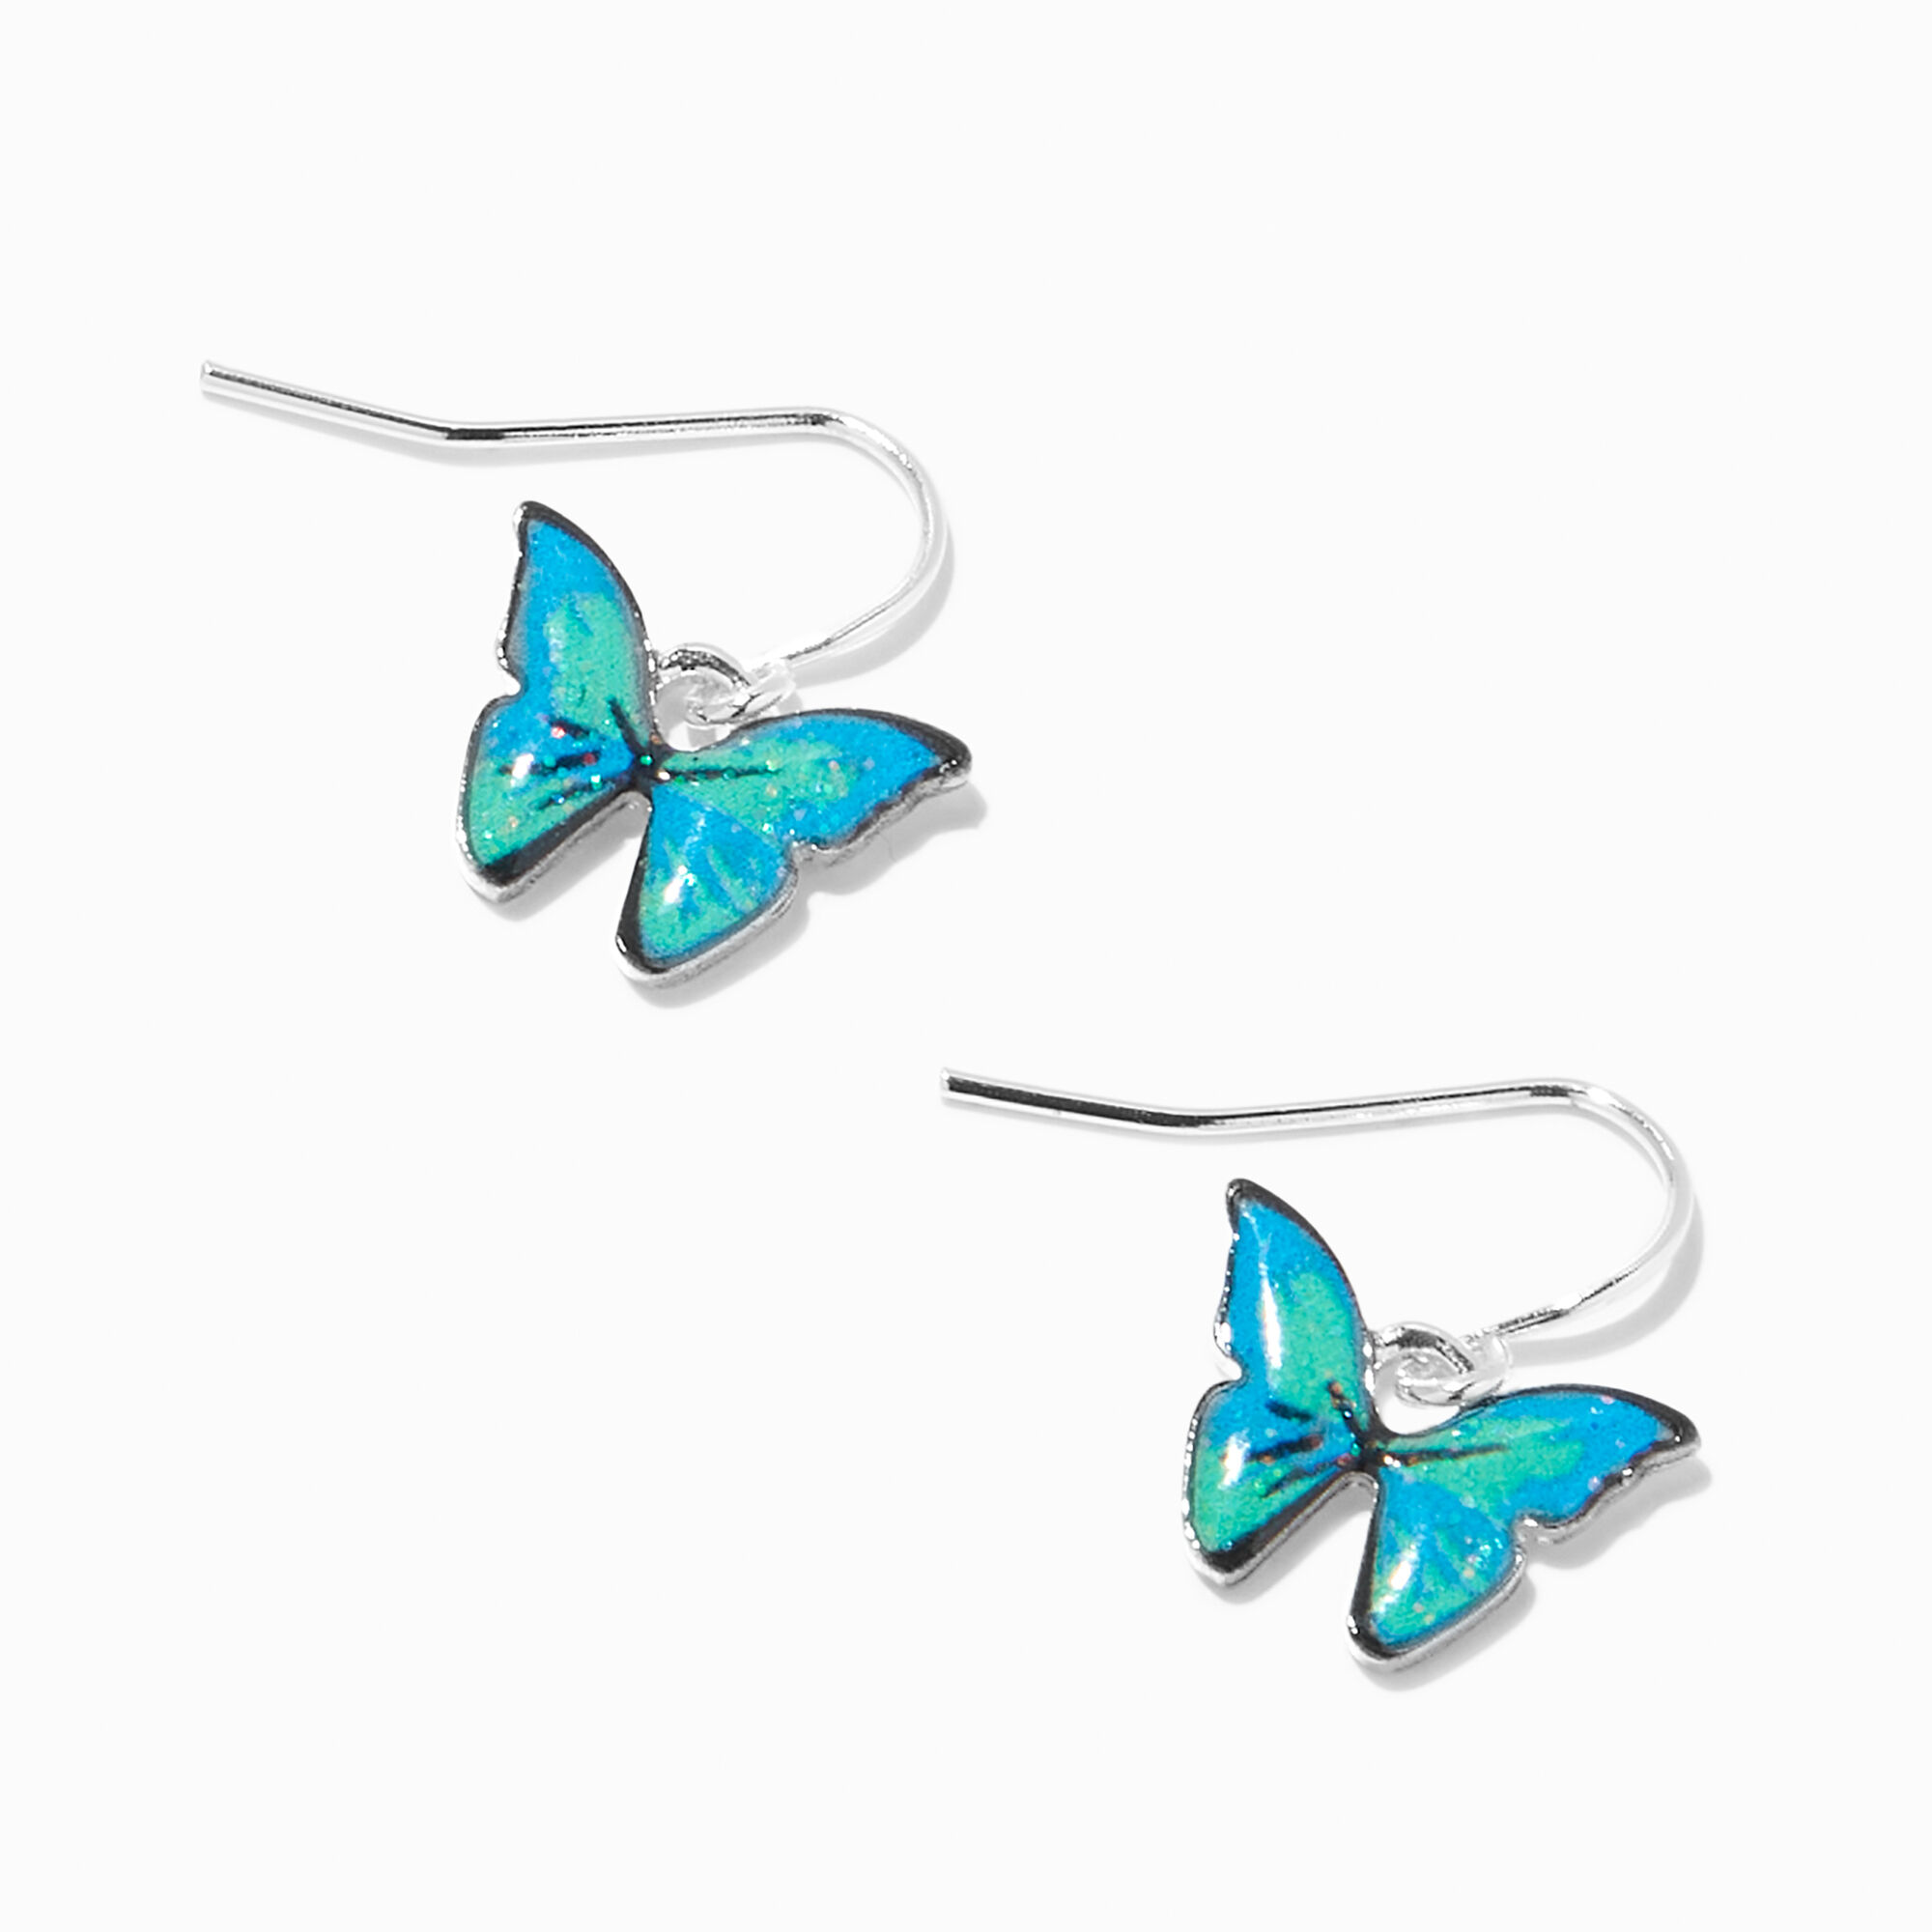 SOHI Latest Stylish Enamel Butterfly Shaped Studs Earrings In Cobalt Blue  and Emerald Green With Crystal Stones Gold Plate Collection For Women and  Girls : Amazon.in: Fashion